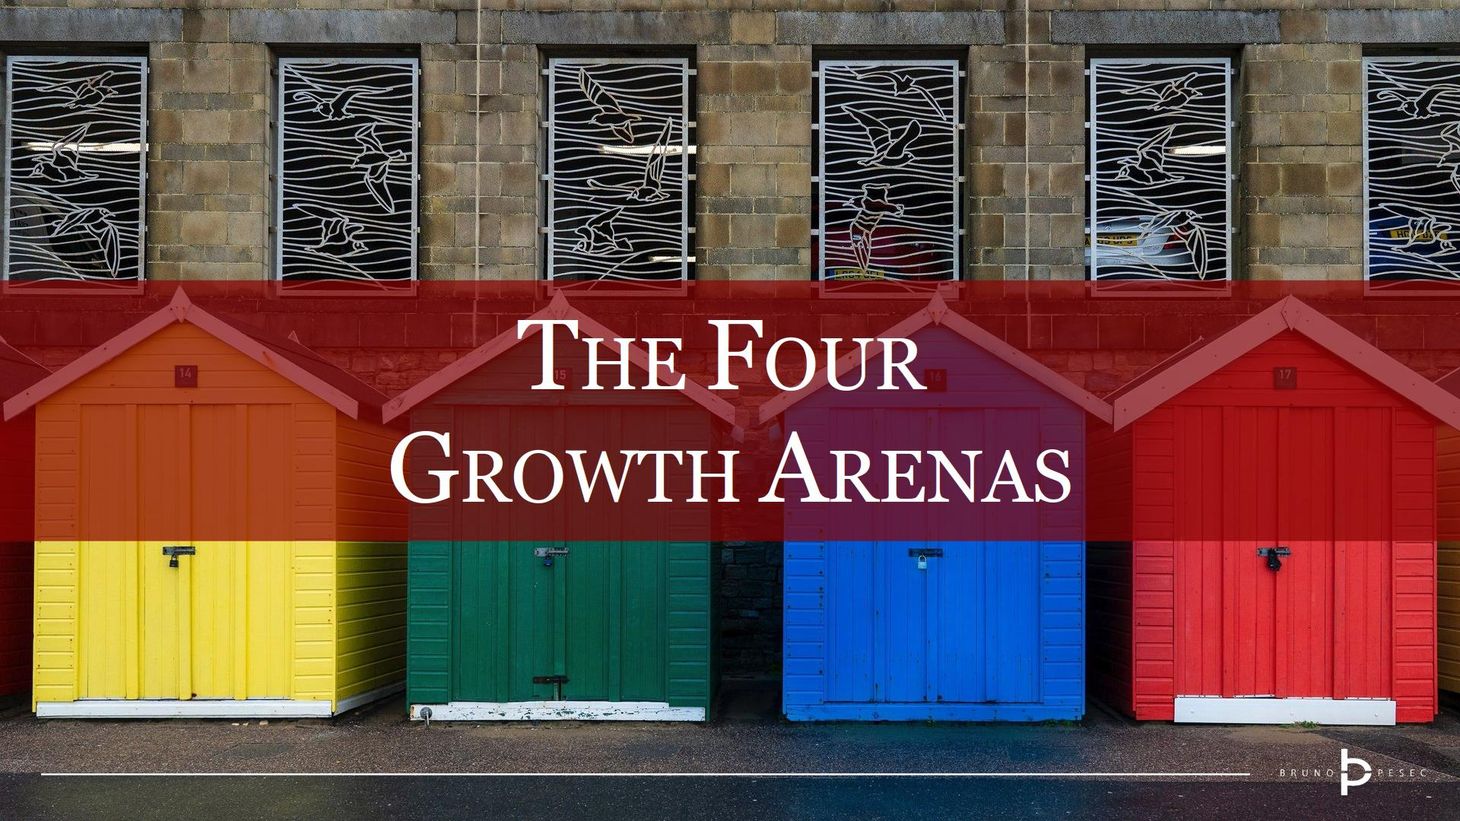 The Four Growth Arenas